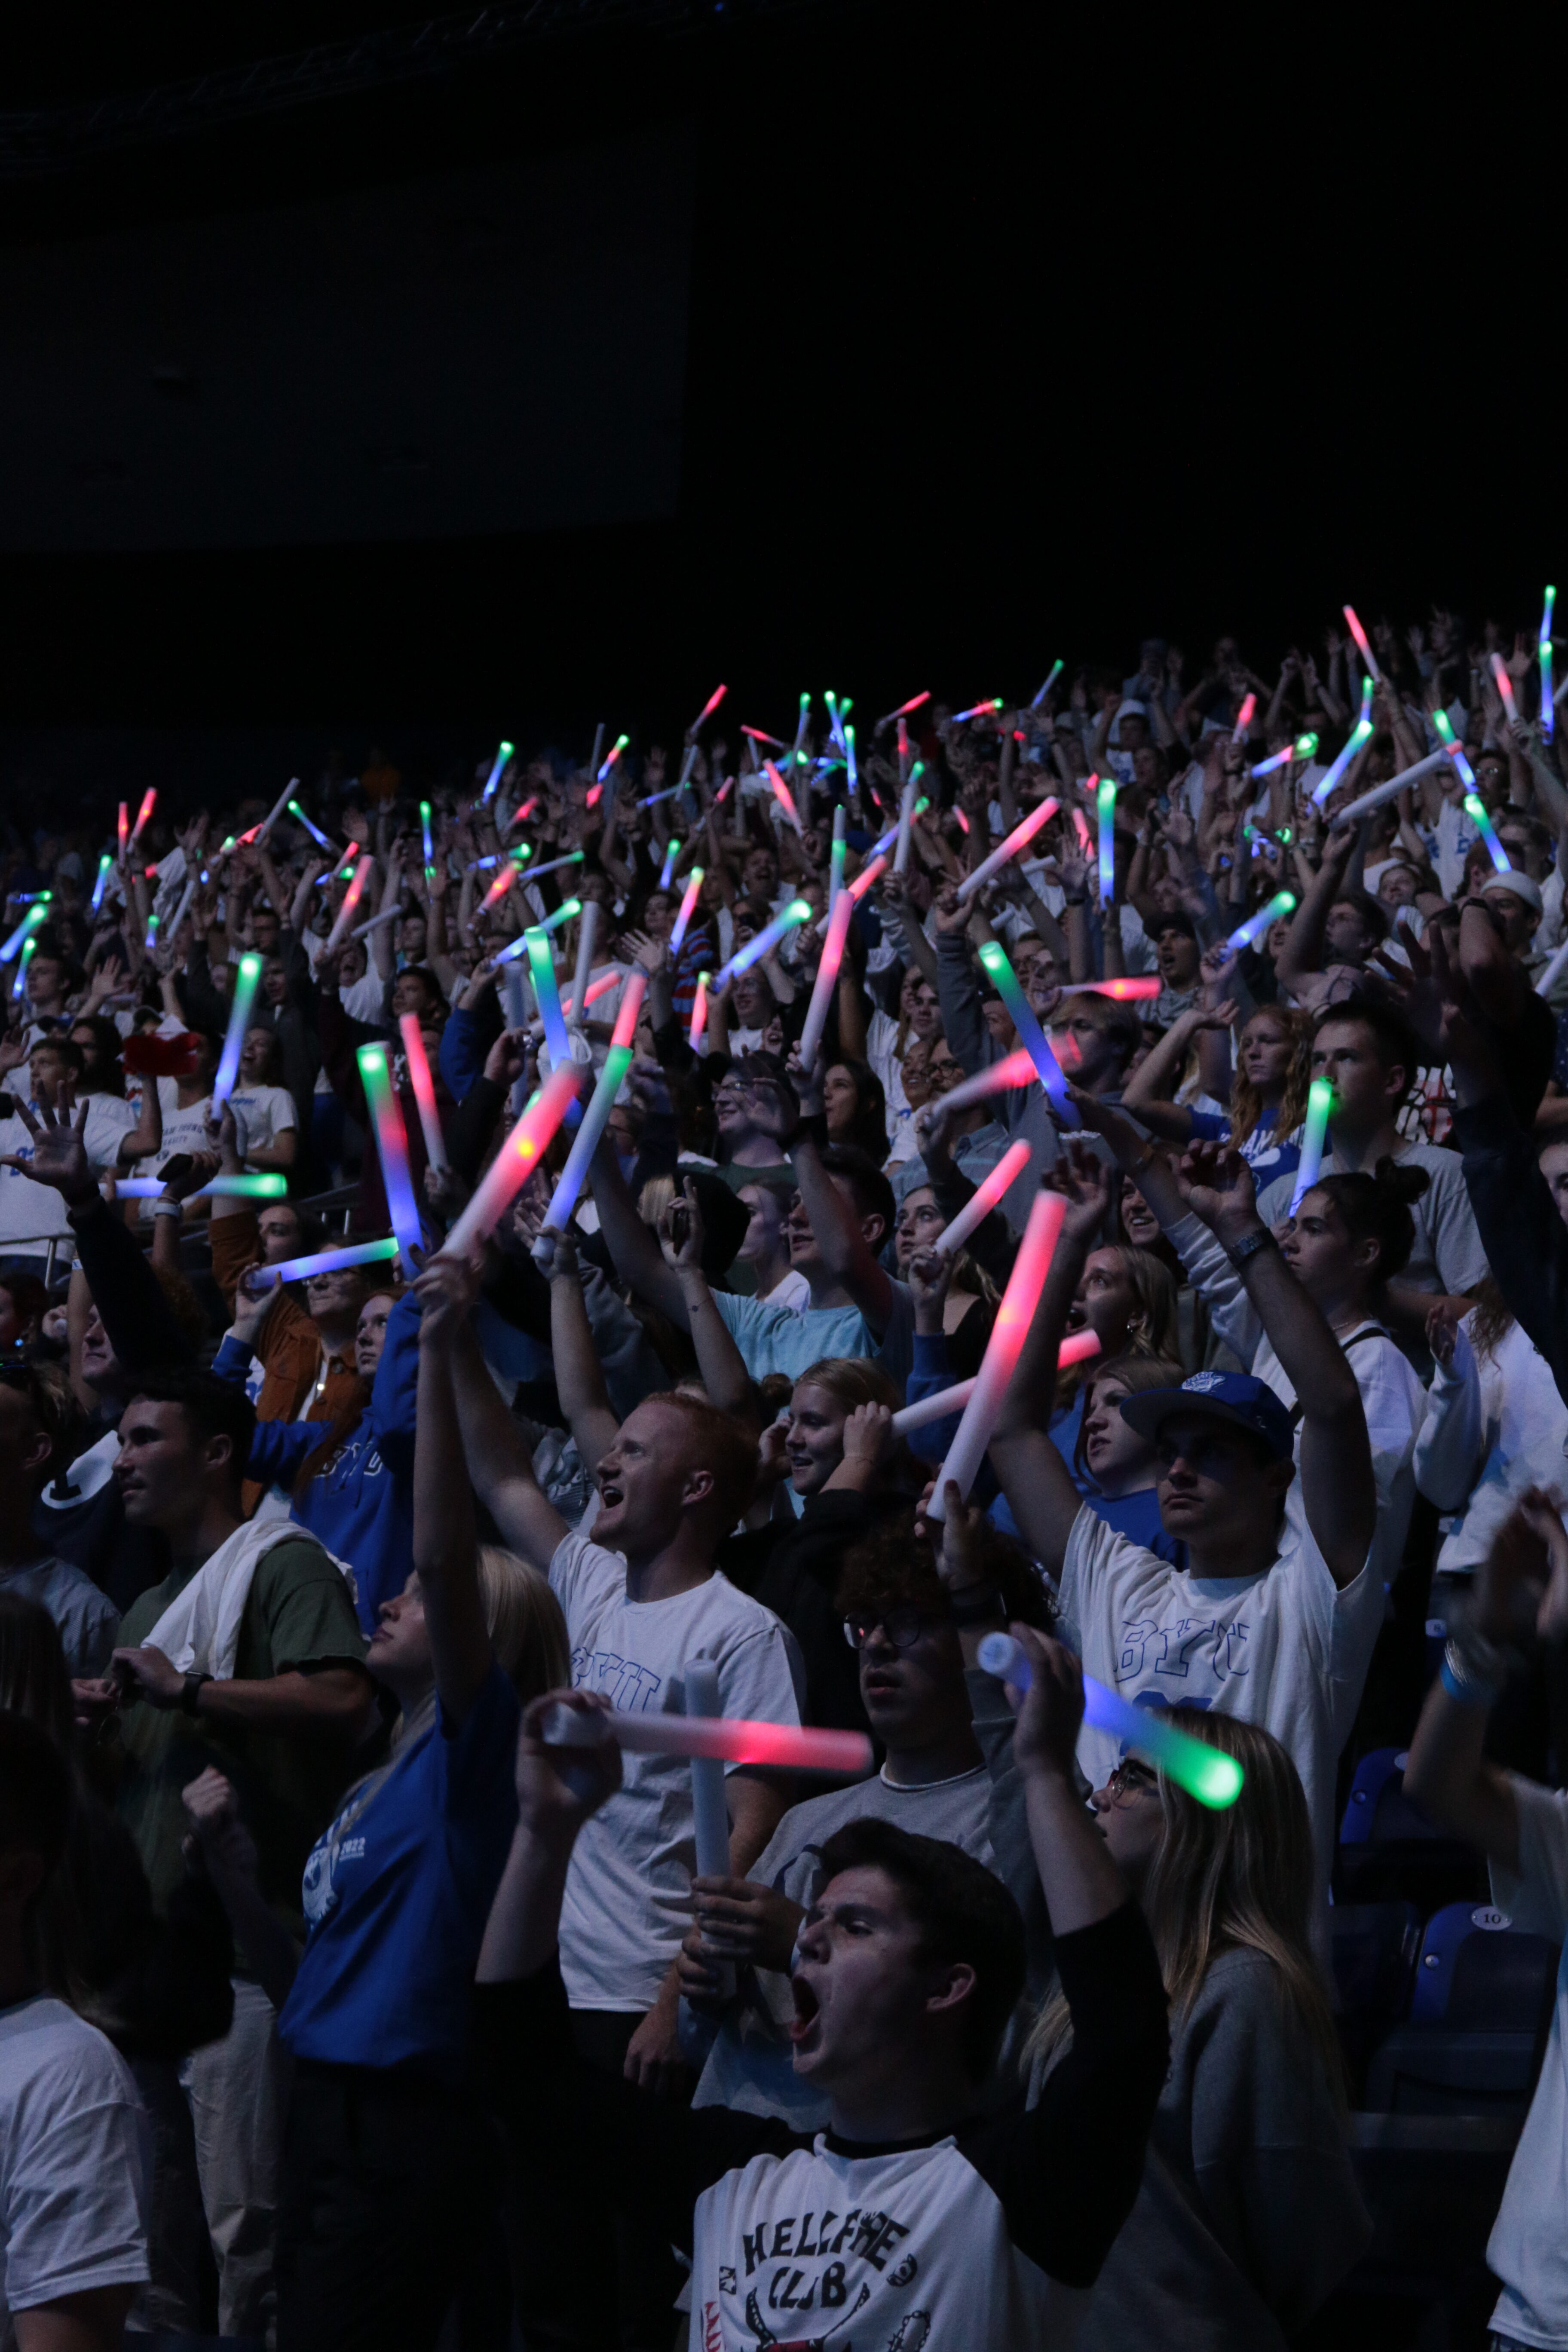 BYU's annual Midnight Madness lives up to its name